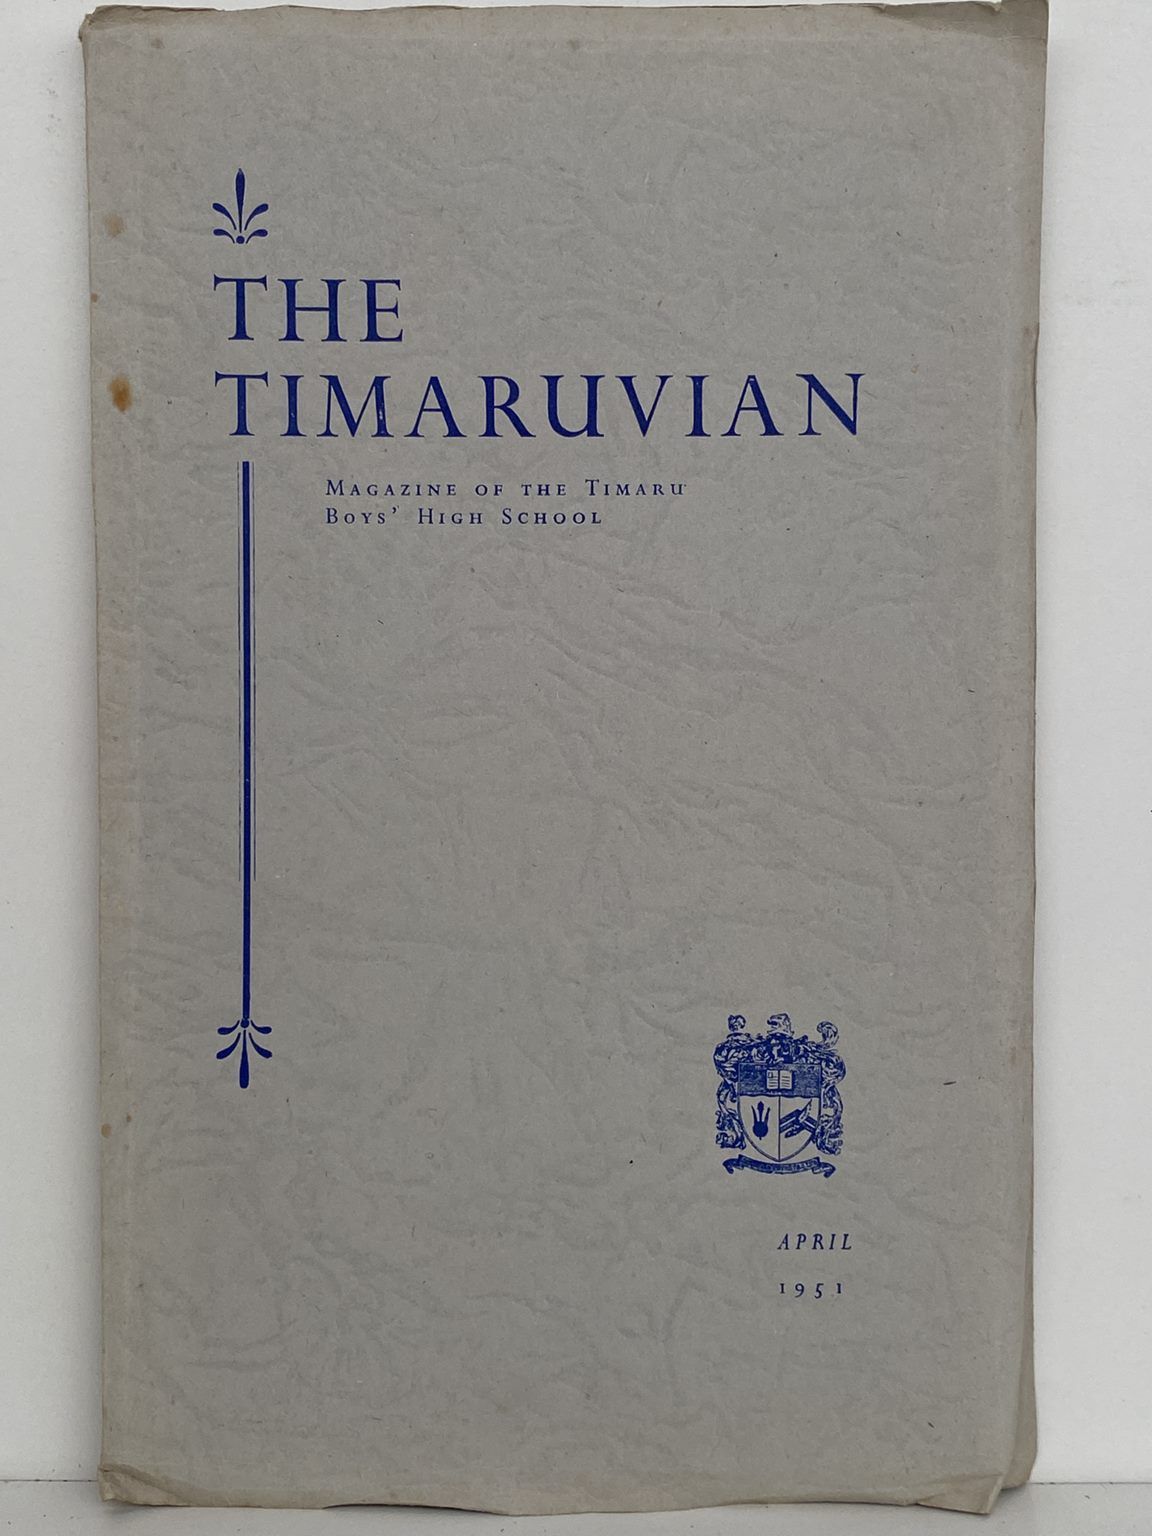 THE TIMARUVIAN: Magazine of the Timaru Boys' High School and its Old Boys' Association 1951